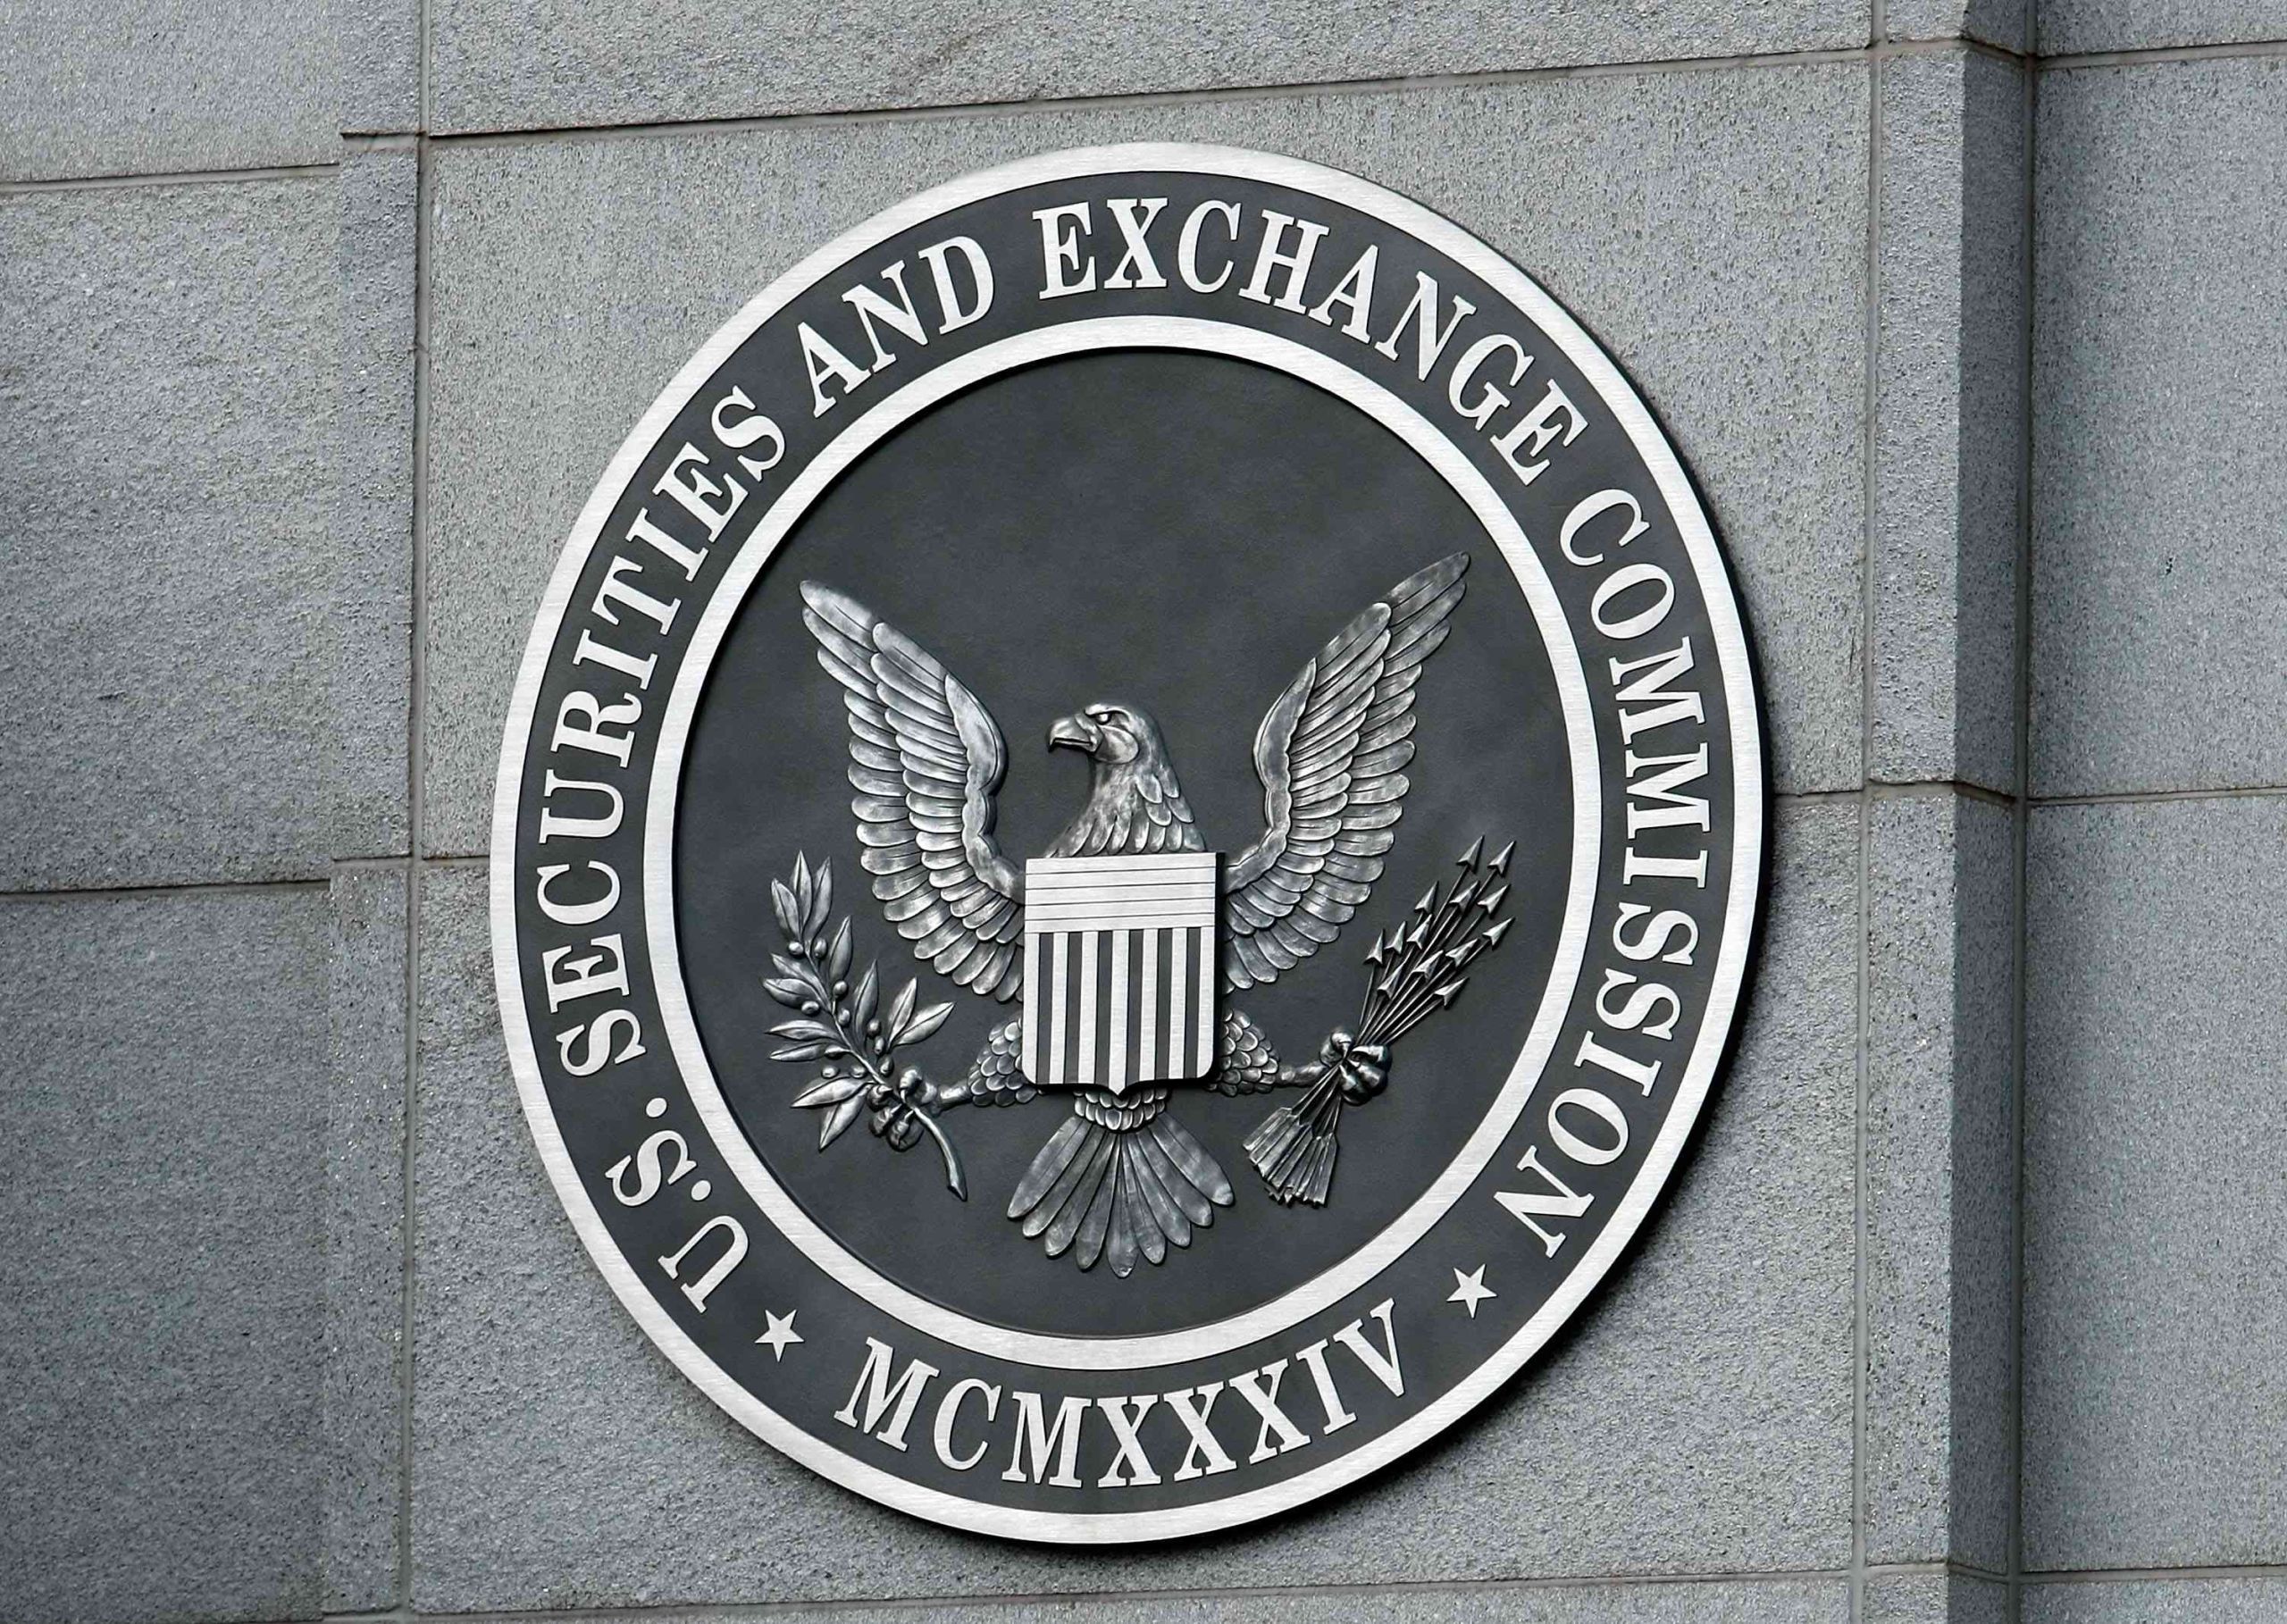 The SEC Proposes Amendments to Shareholder Proposal Rule